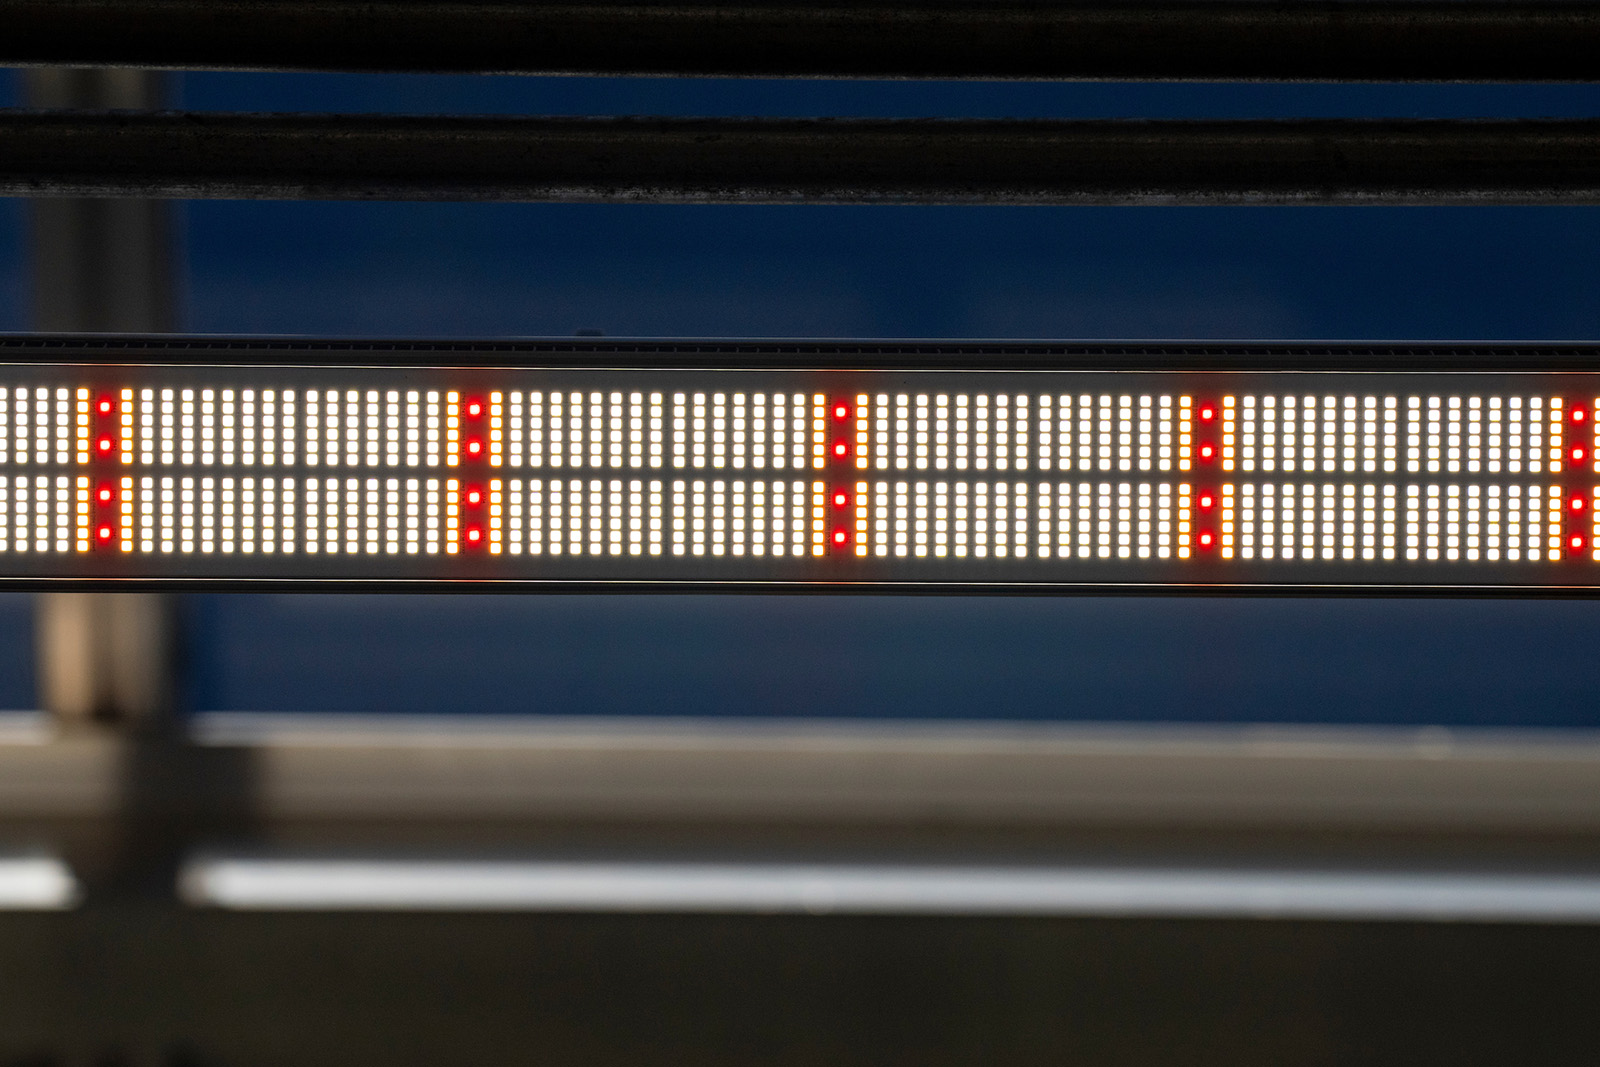 LED light strip close-up showing individual LEDs in pattern of columns and rows